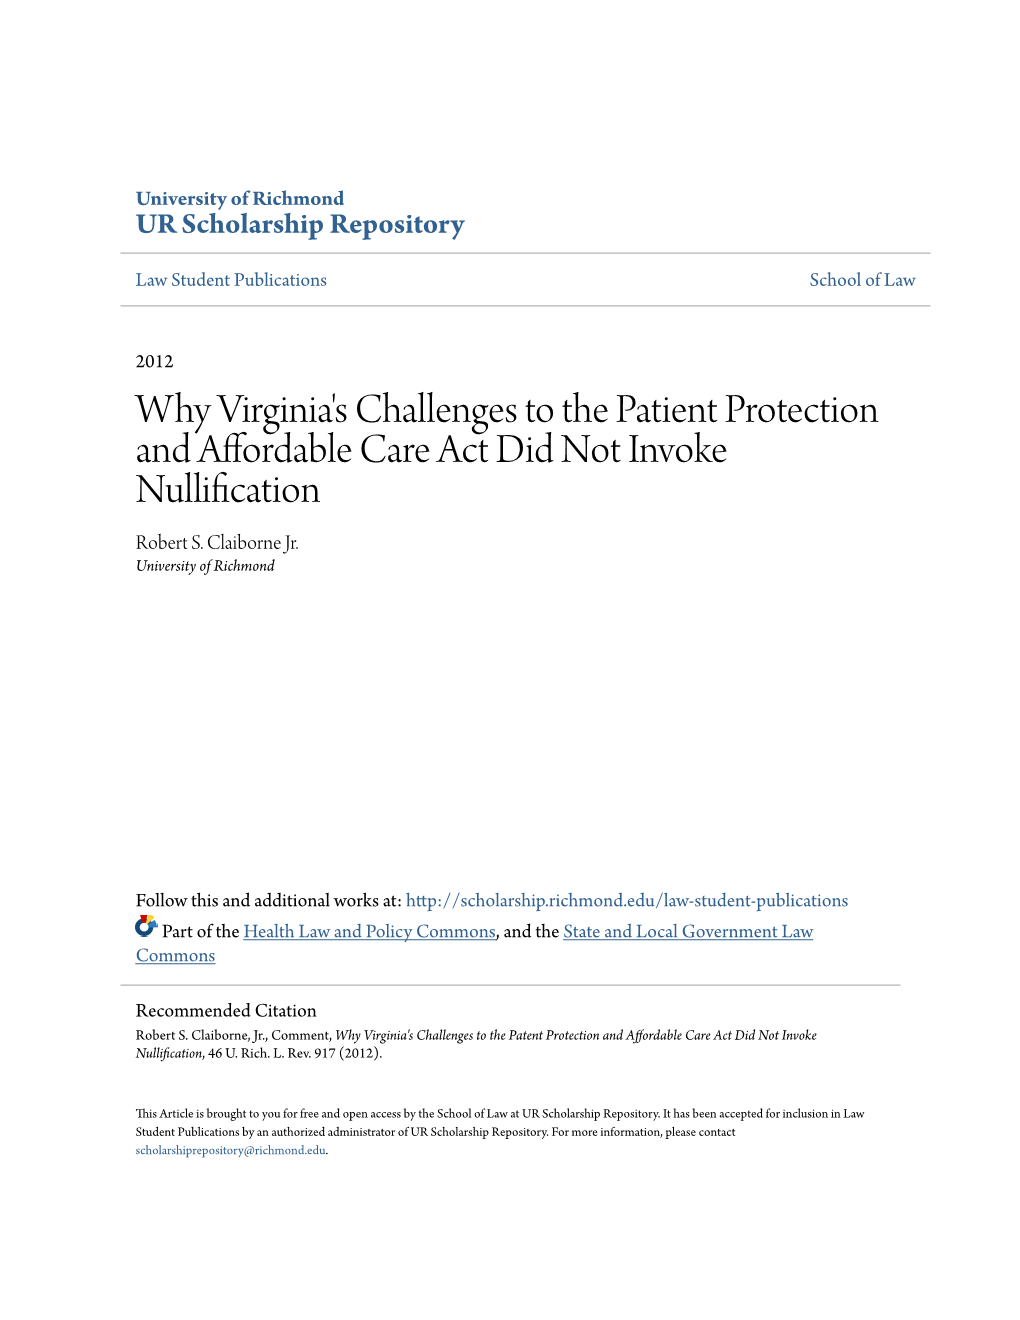 Why Virginia's Challenges to the Patient Protection and Affordable Care Act Did Not Invoke Nullification Robert S